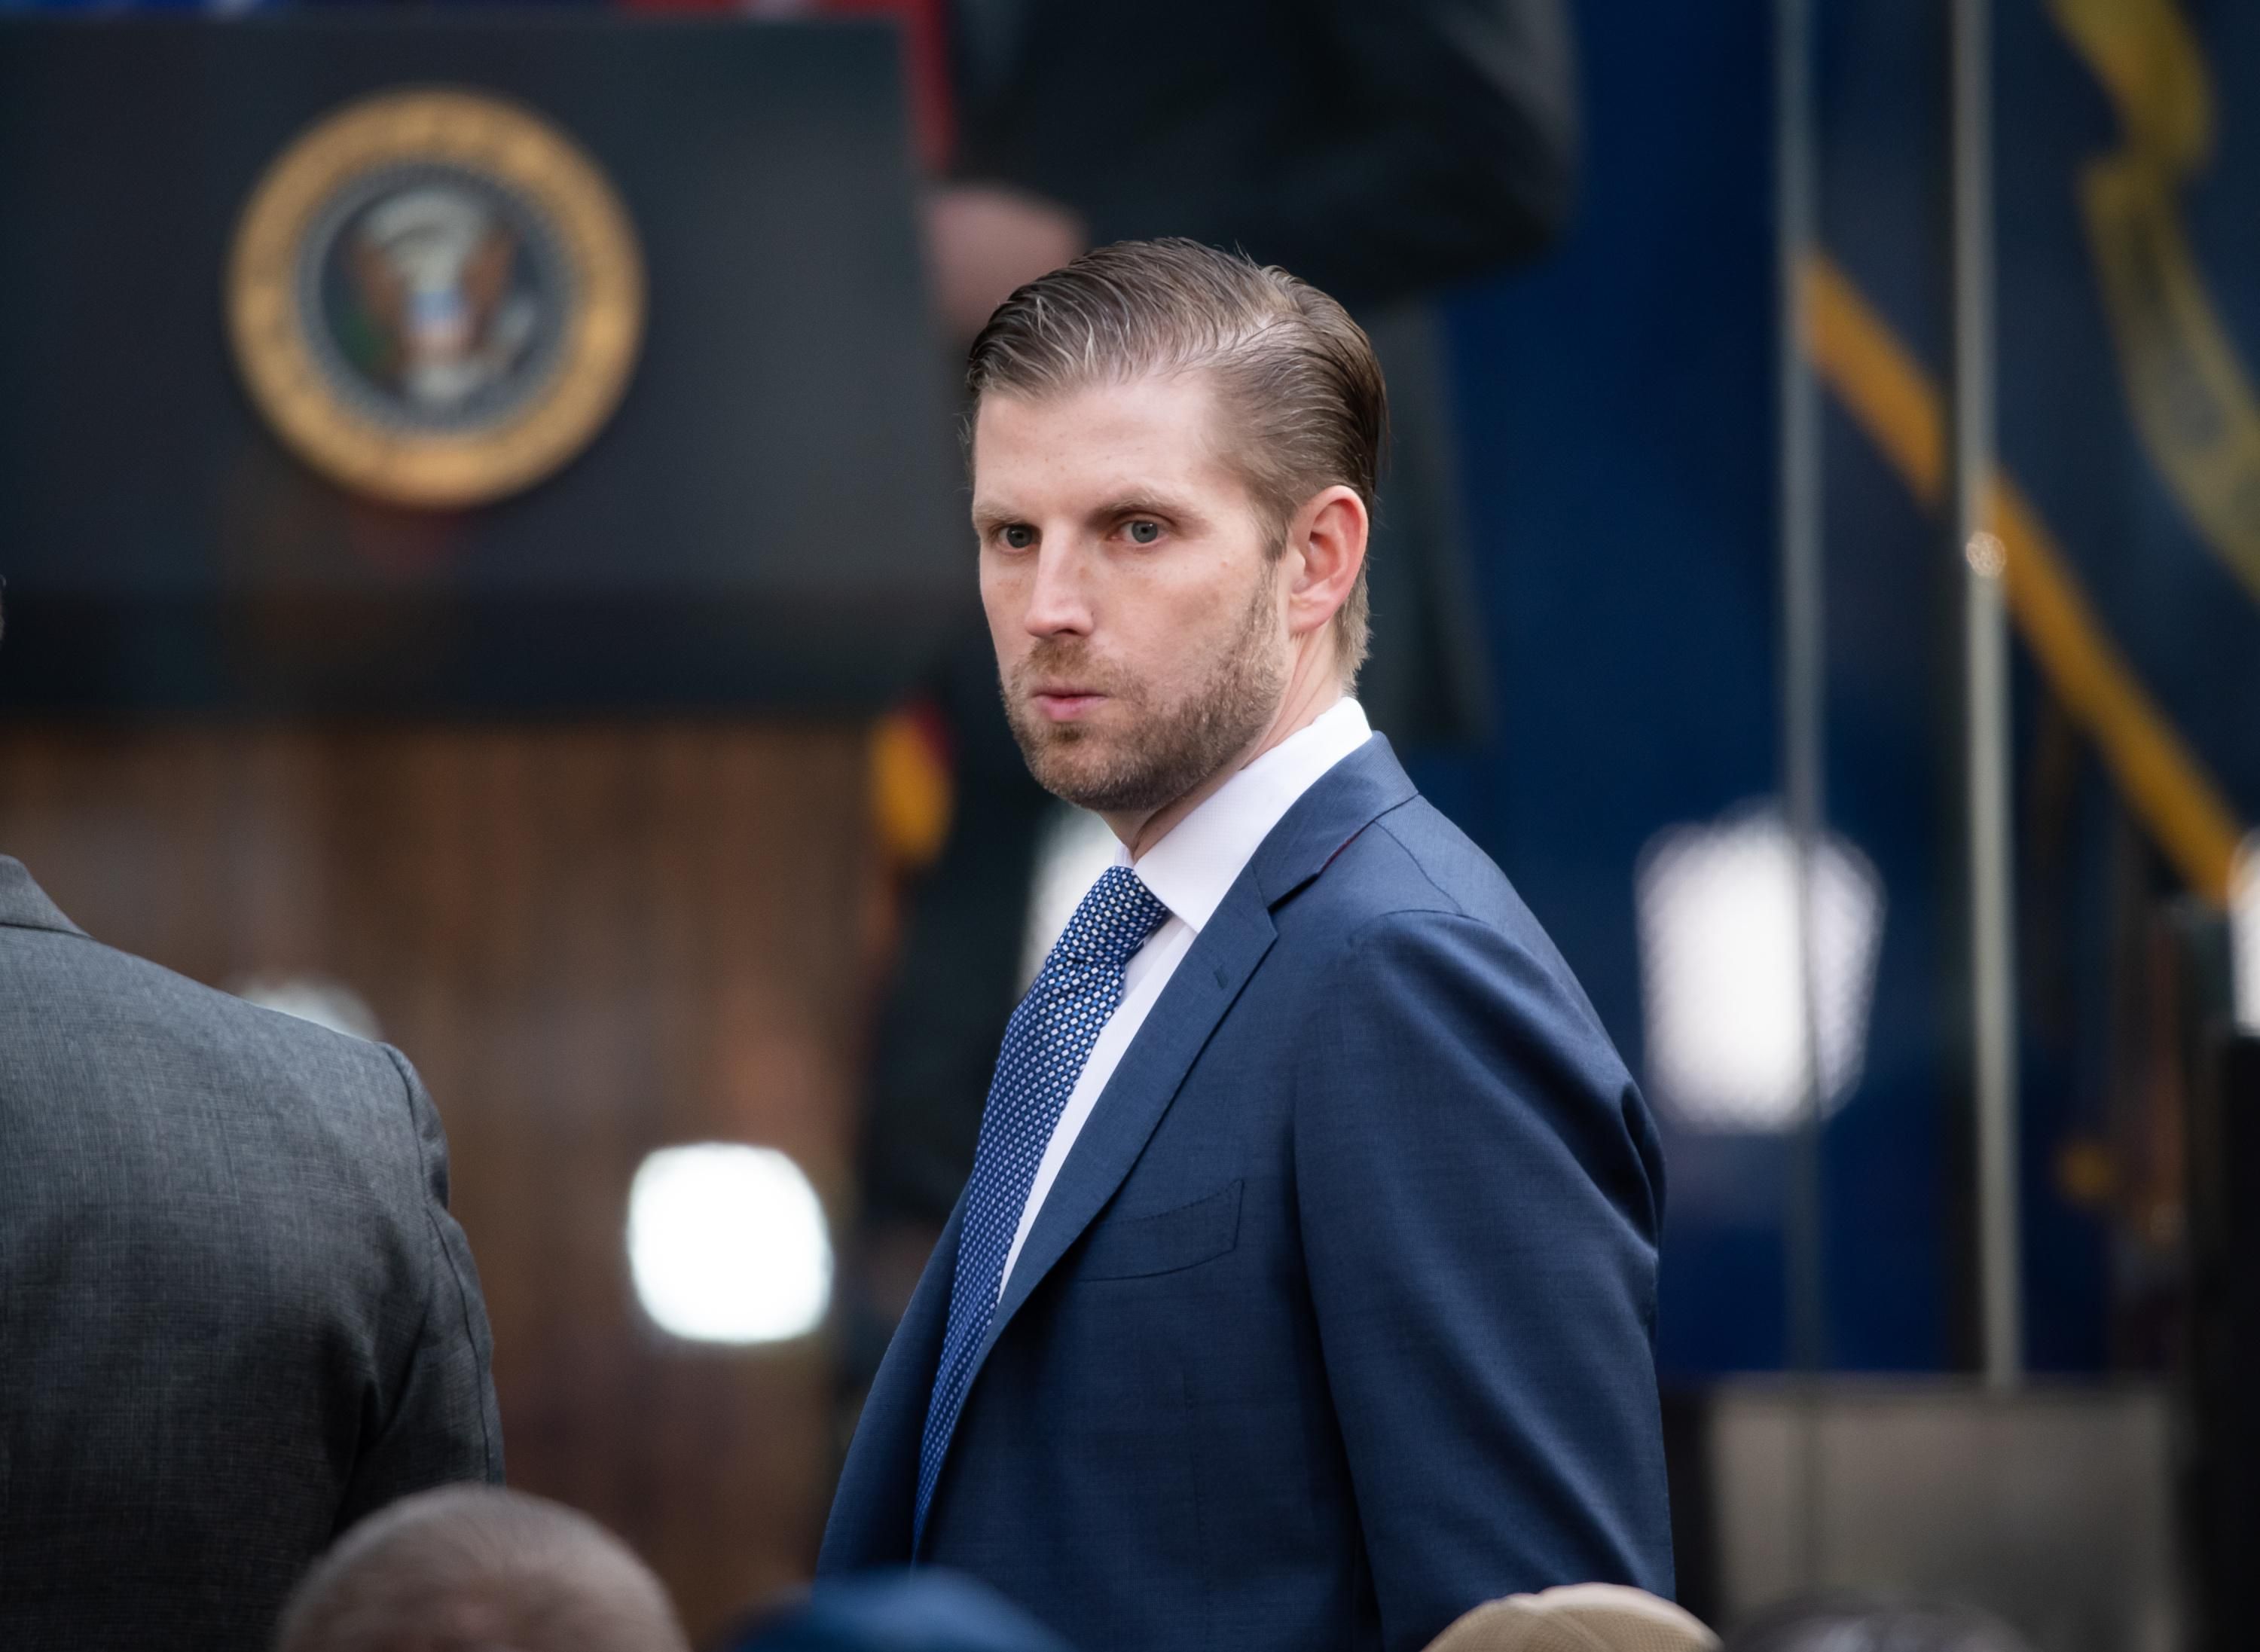 Eric Trump appears at an event